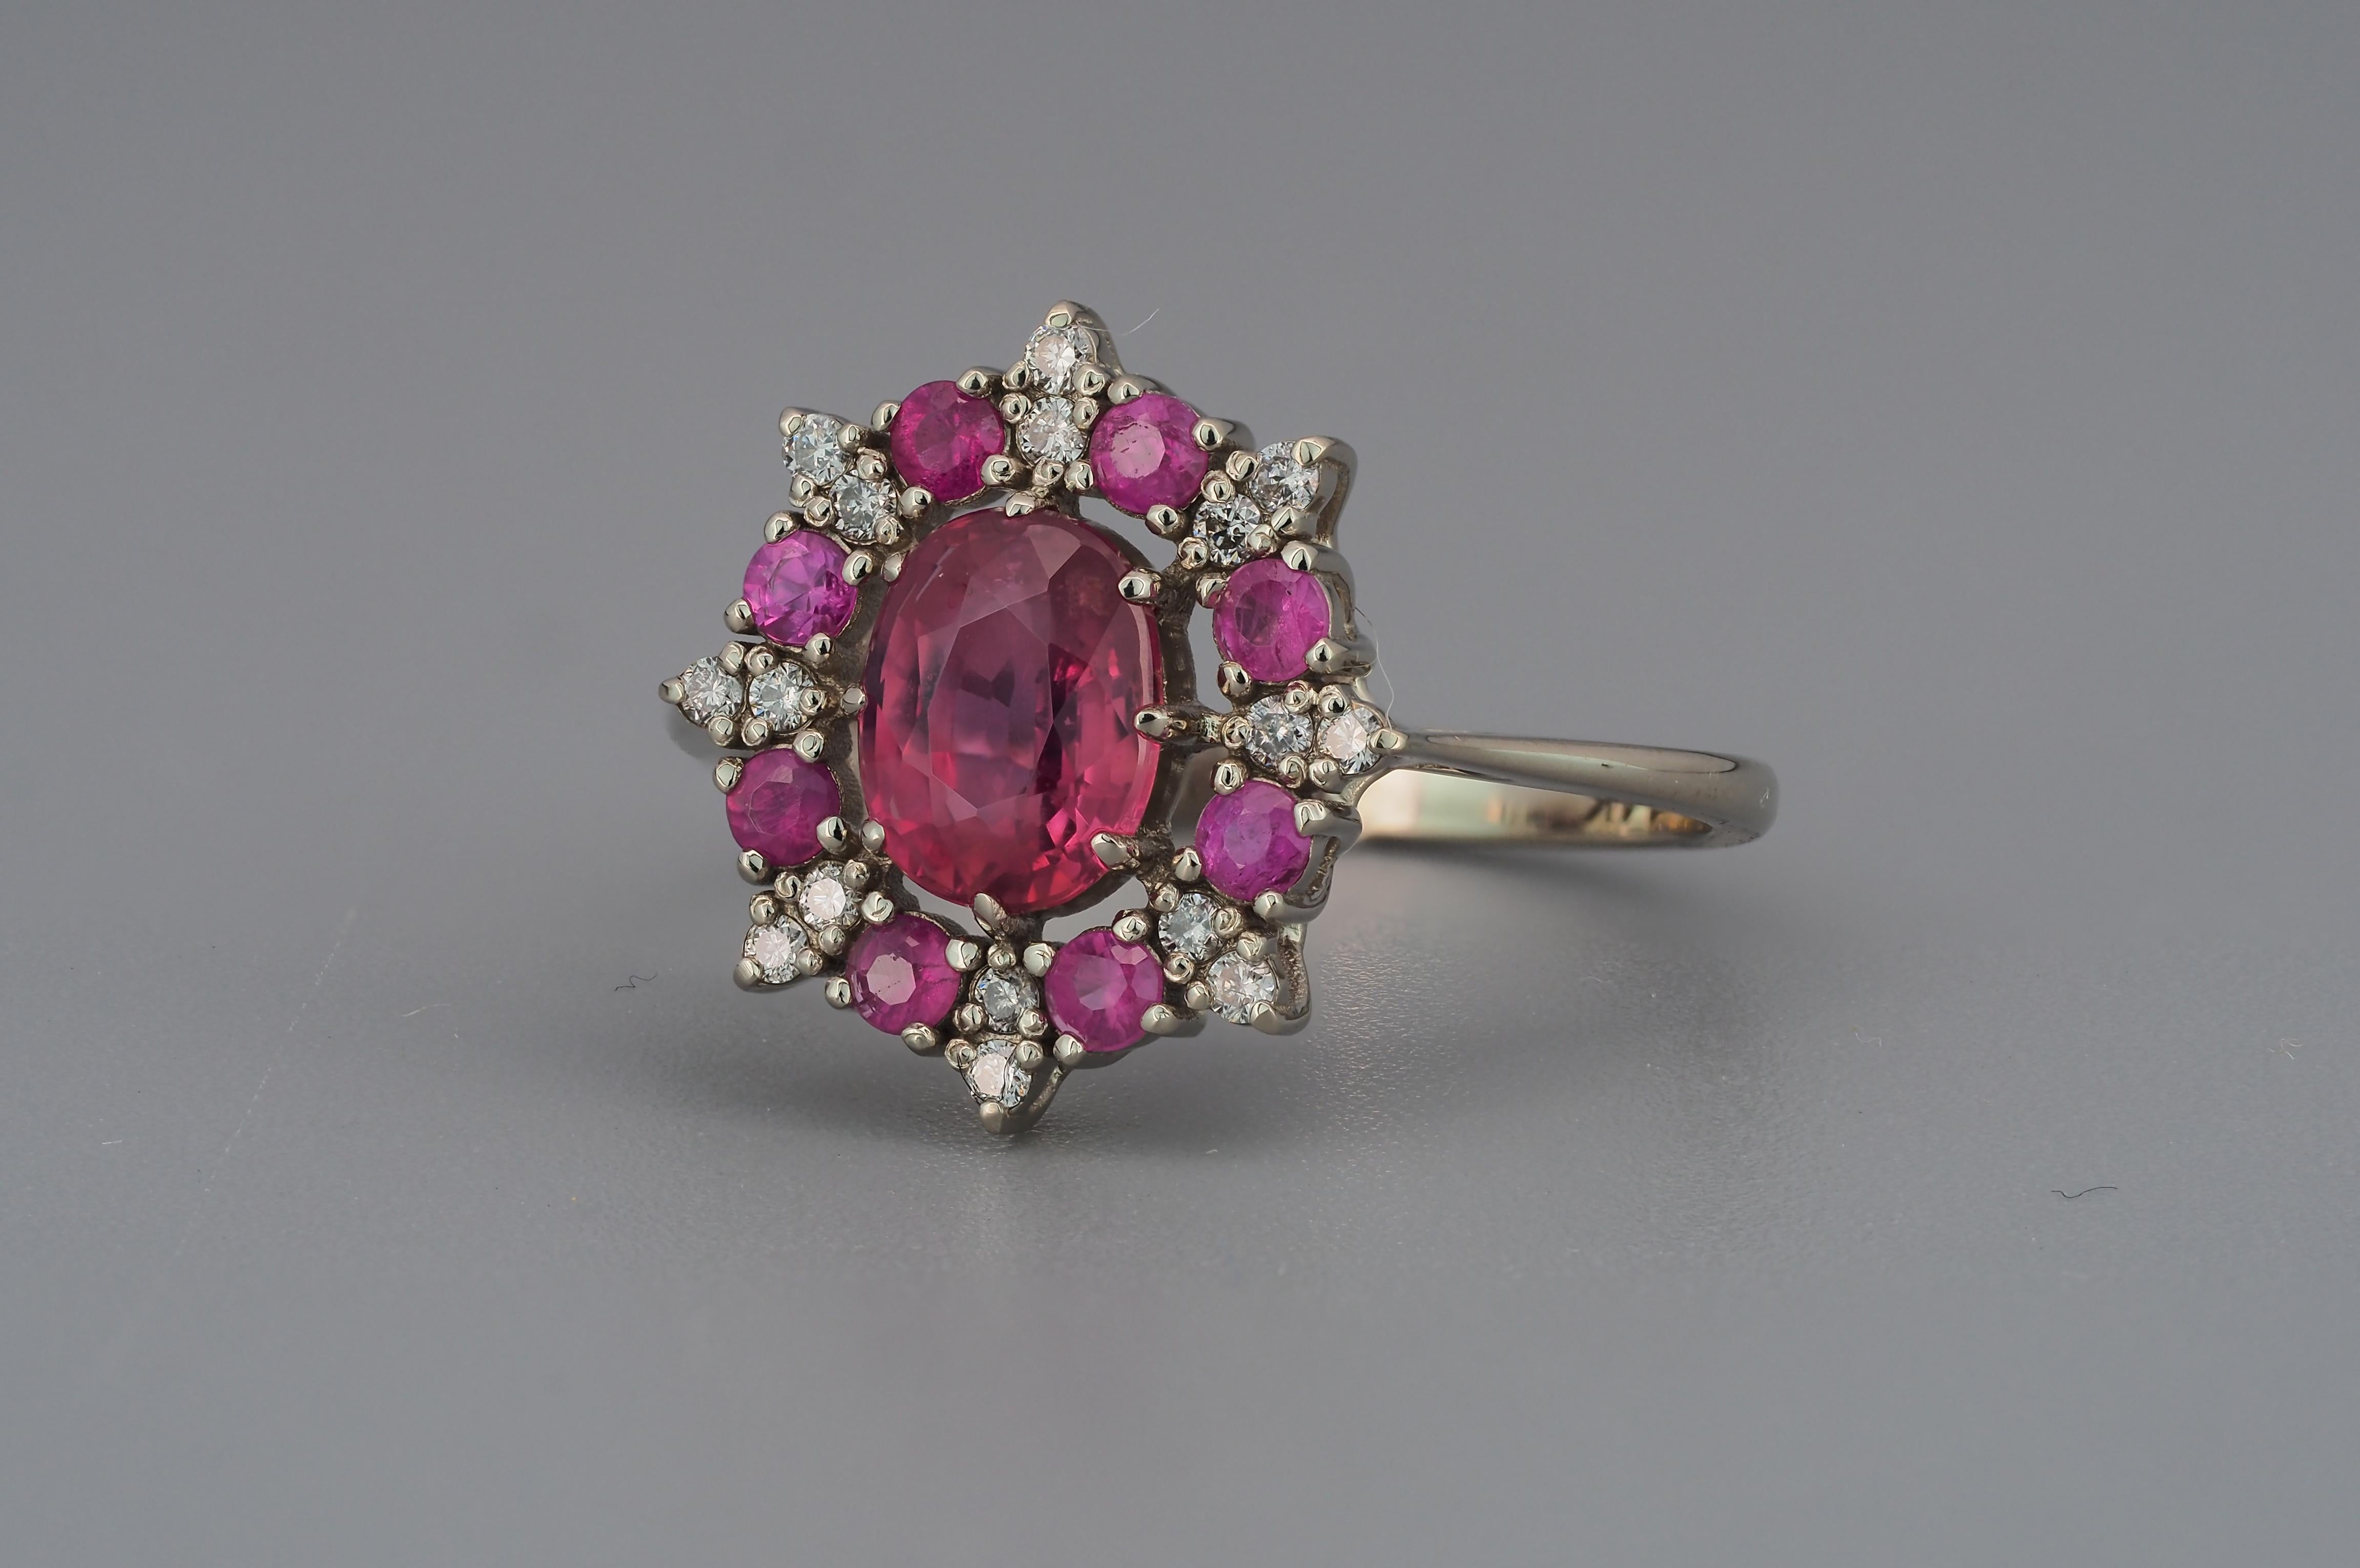 For Sale:  14 karat Gold Ring with Ruby and Diamonds. Snowflake Gold Ring 6